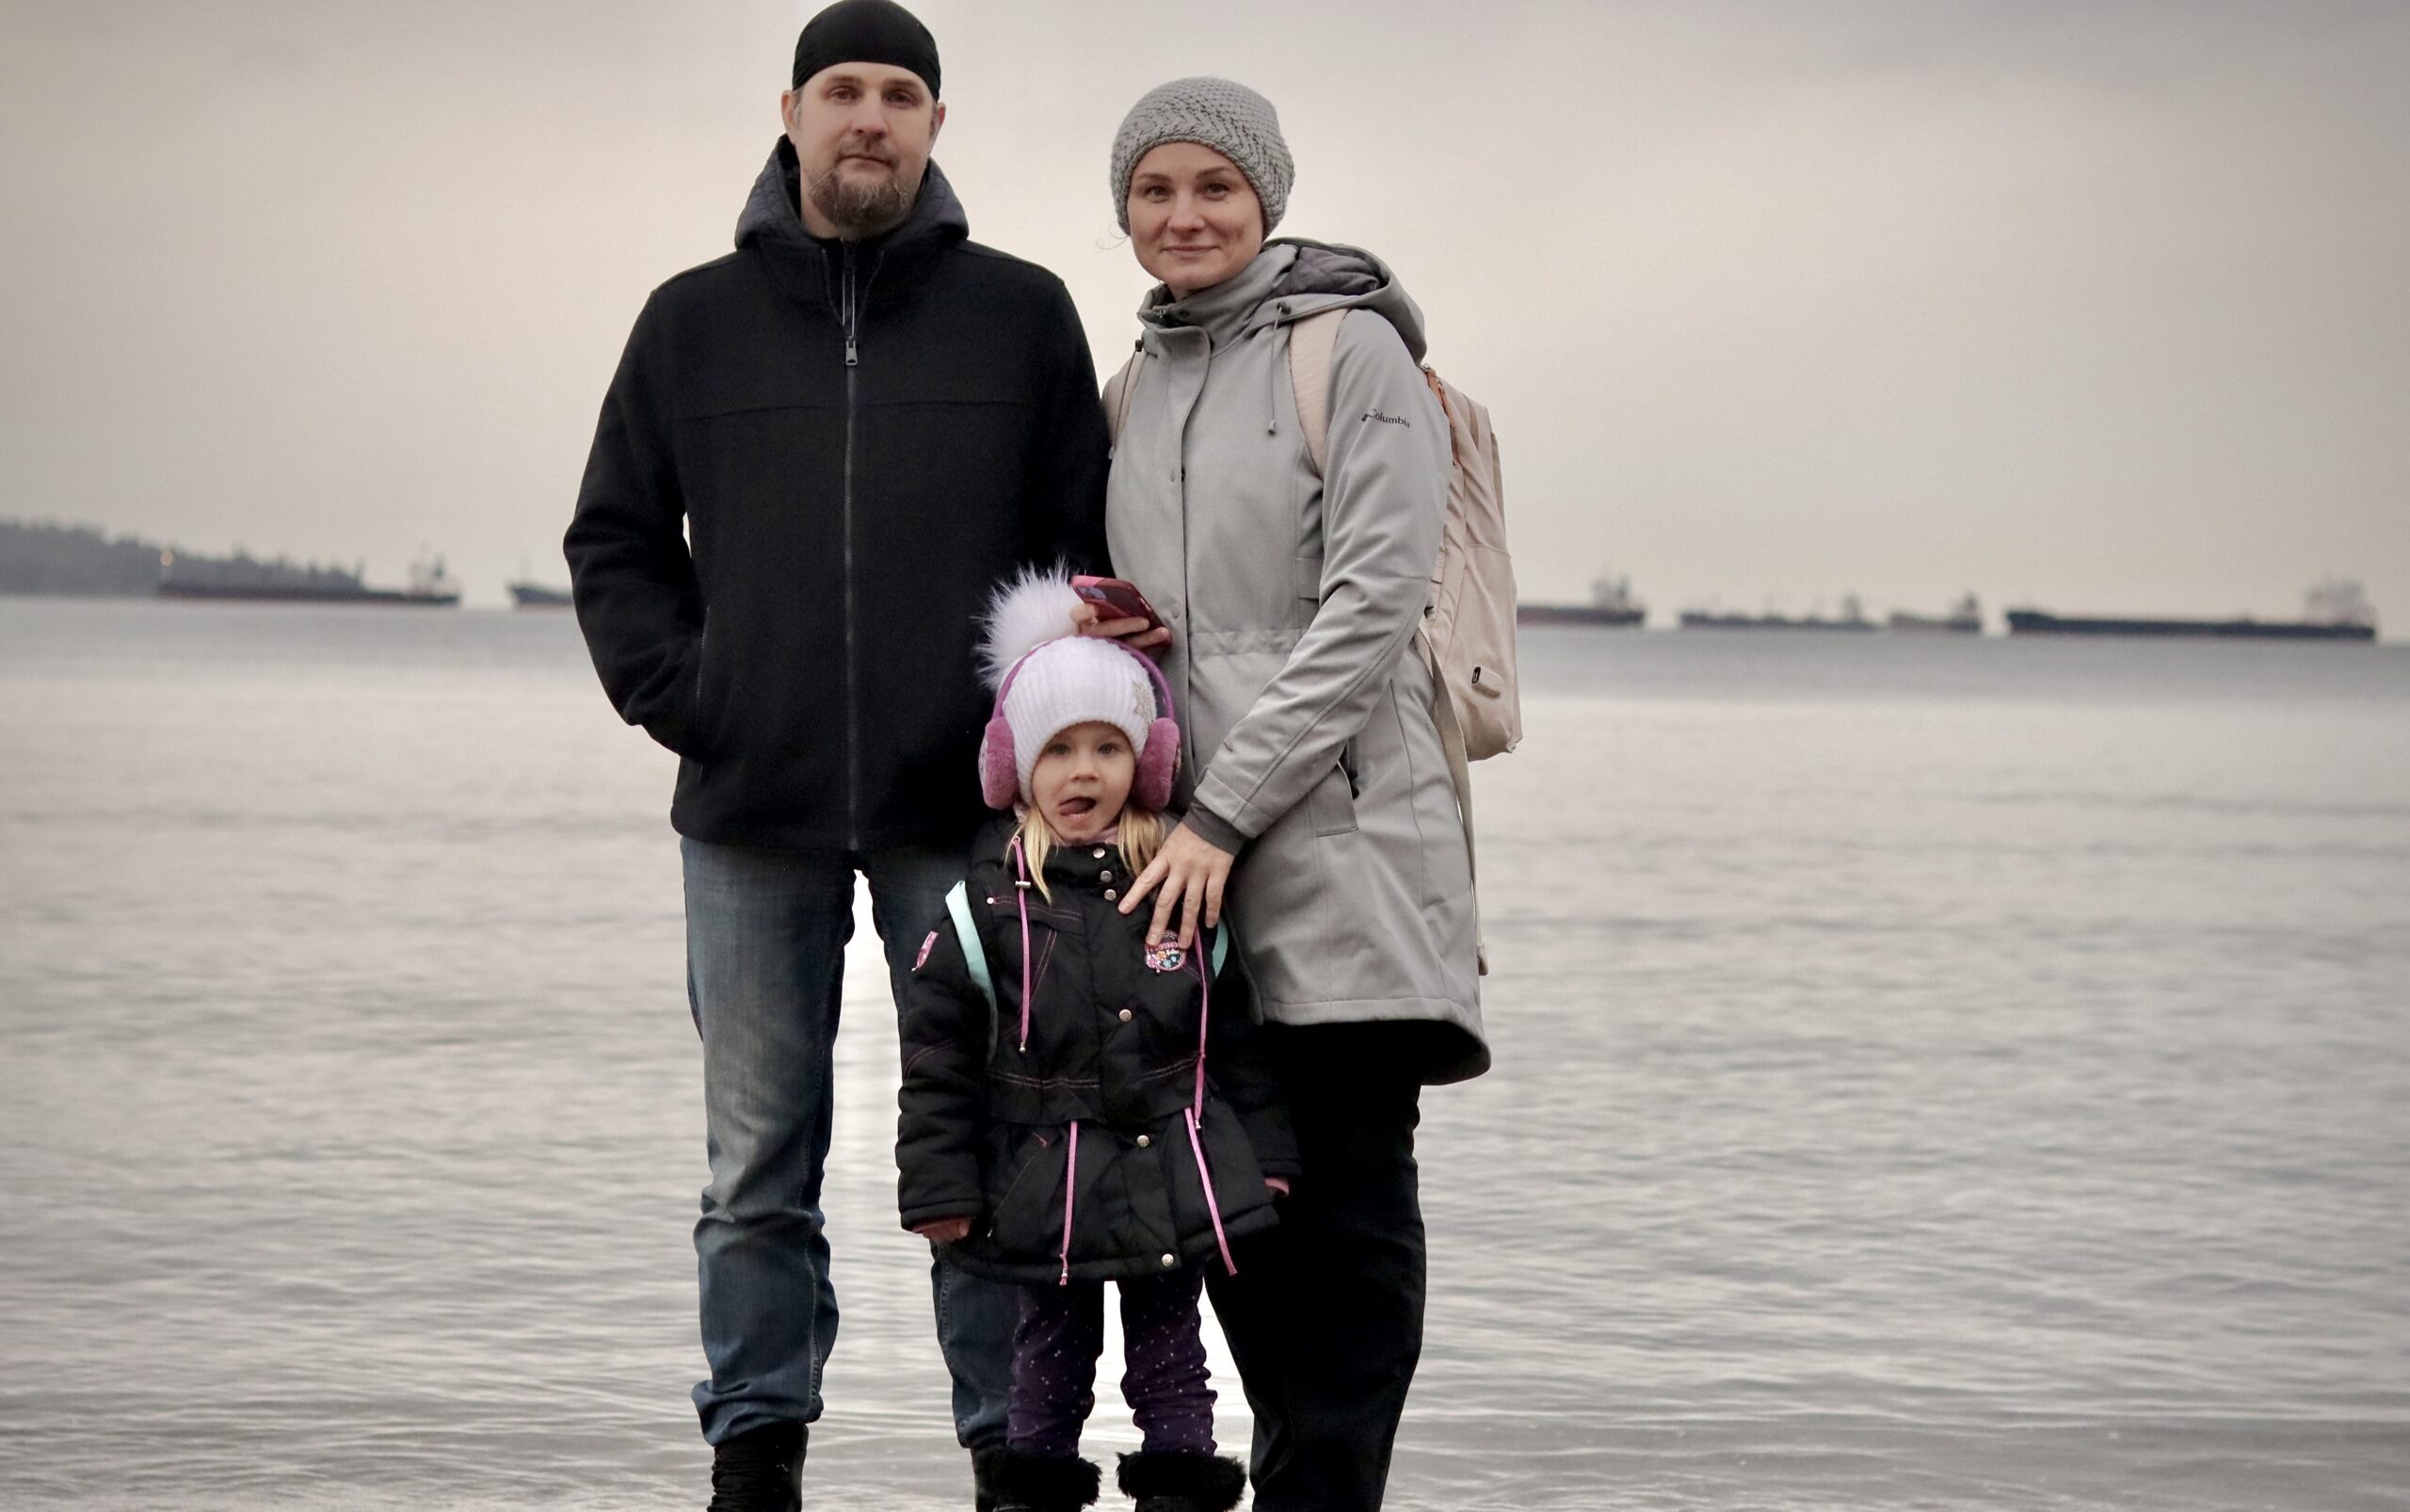 Yuliya Solovyova with her husband, Oleksandr, and their four-year-old daughter Erica.